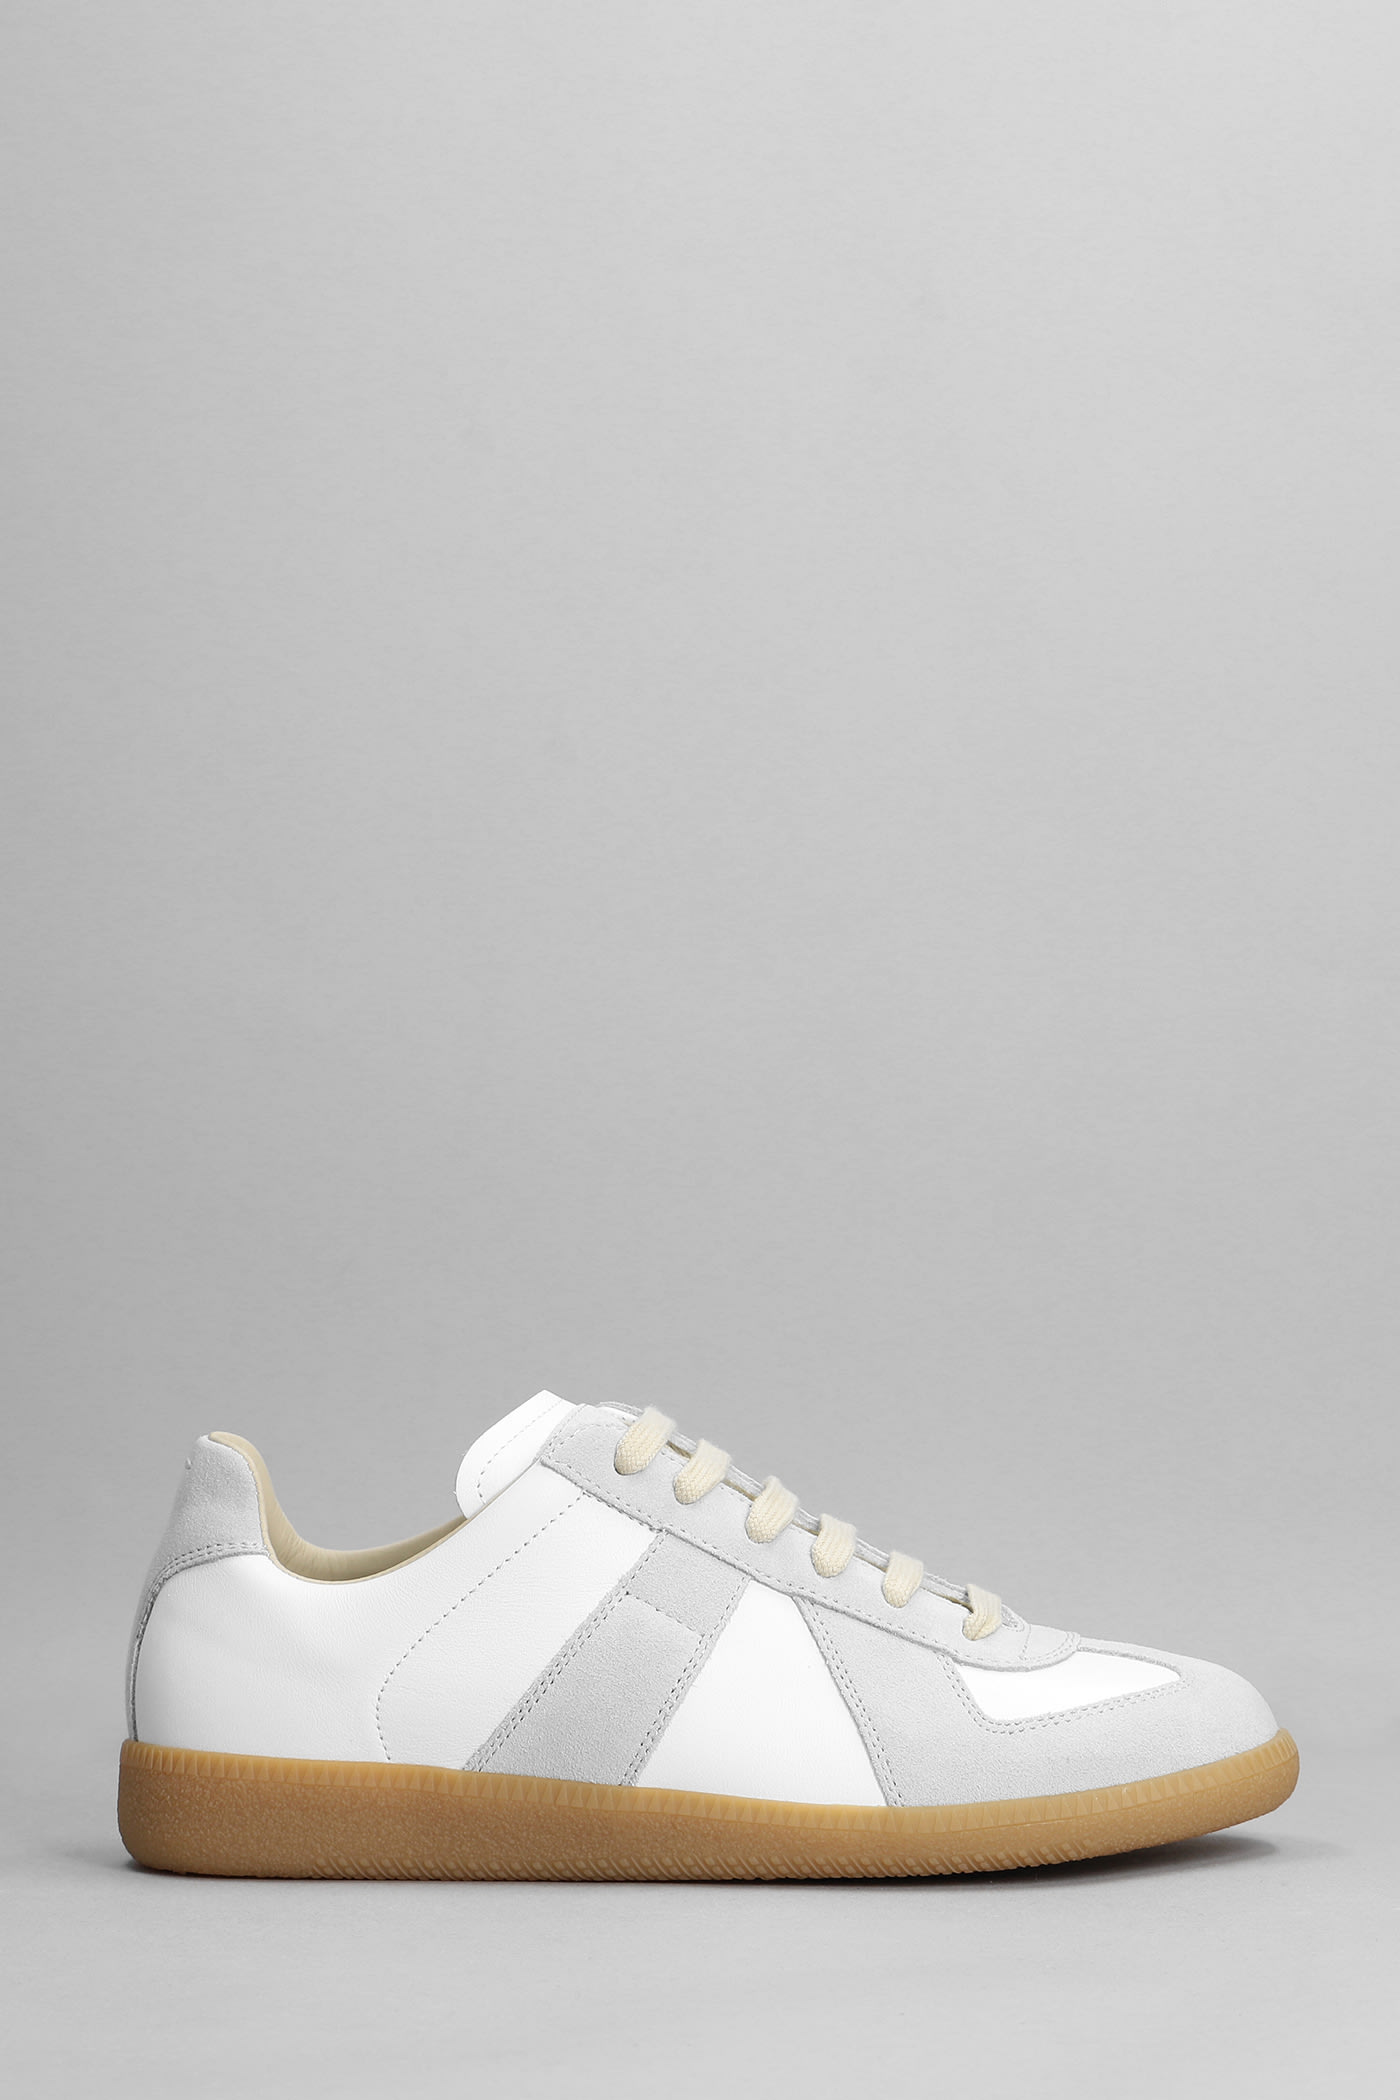 MAISON MARGIELA SNEAKERS IN WHITE SUEDE AND LEATHER